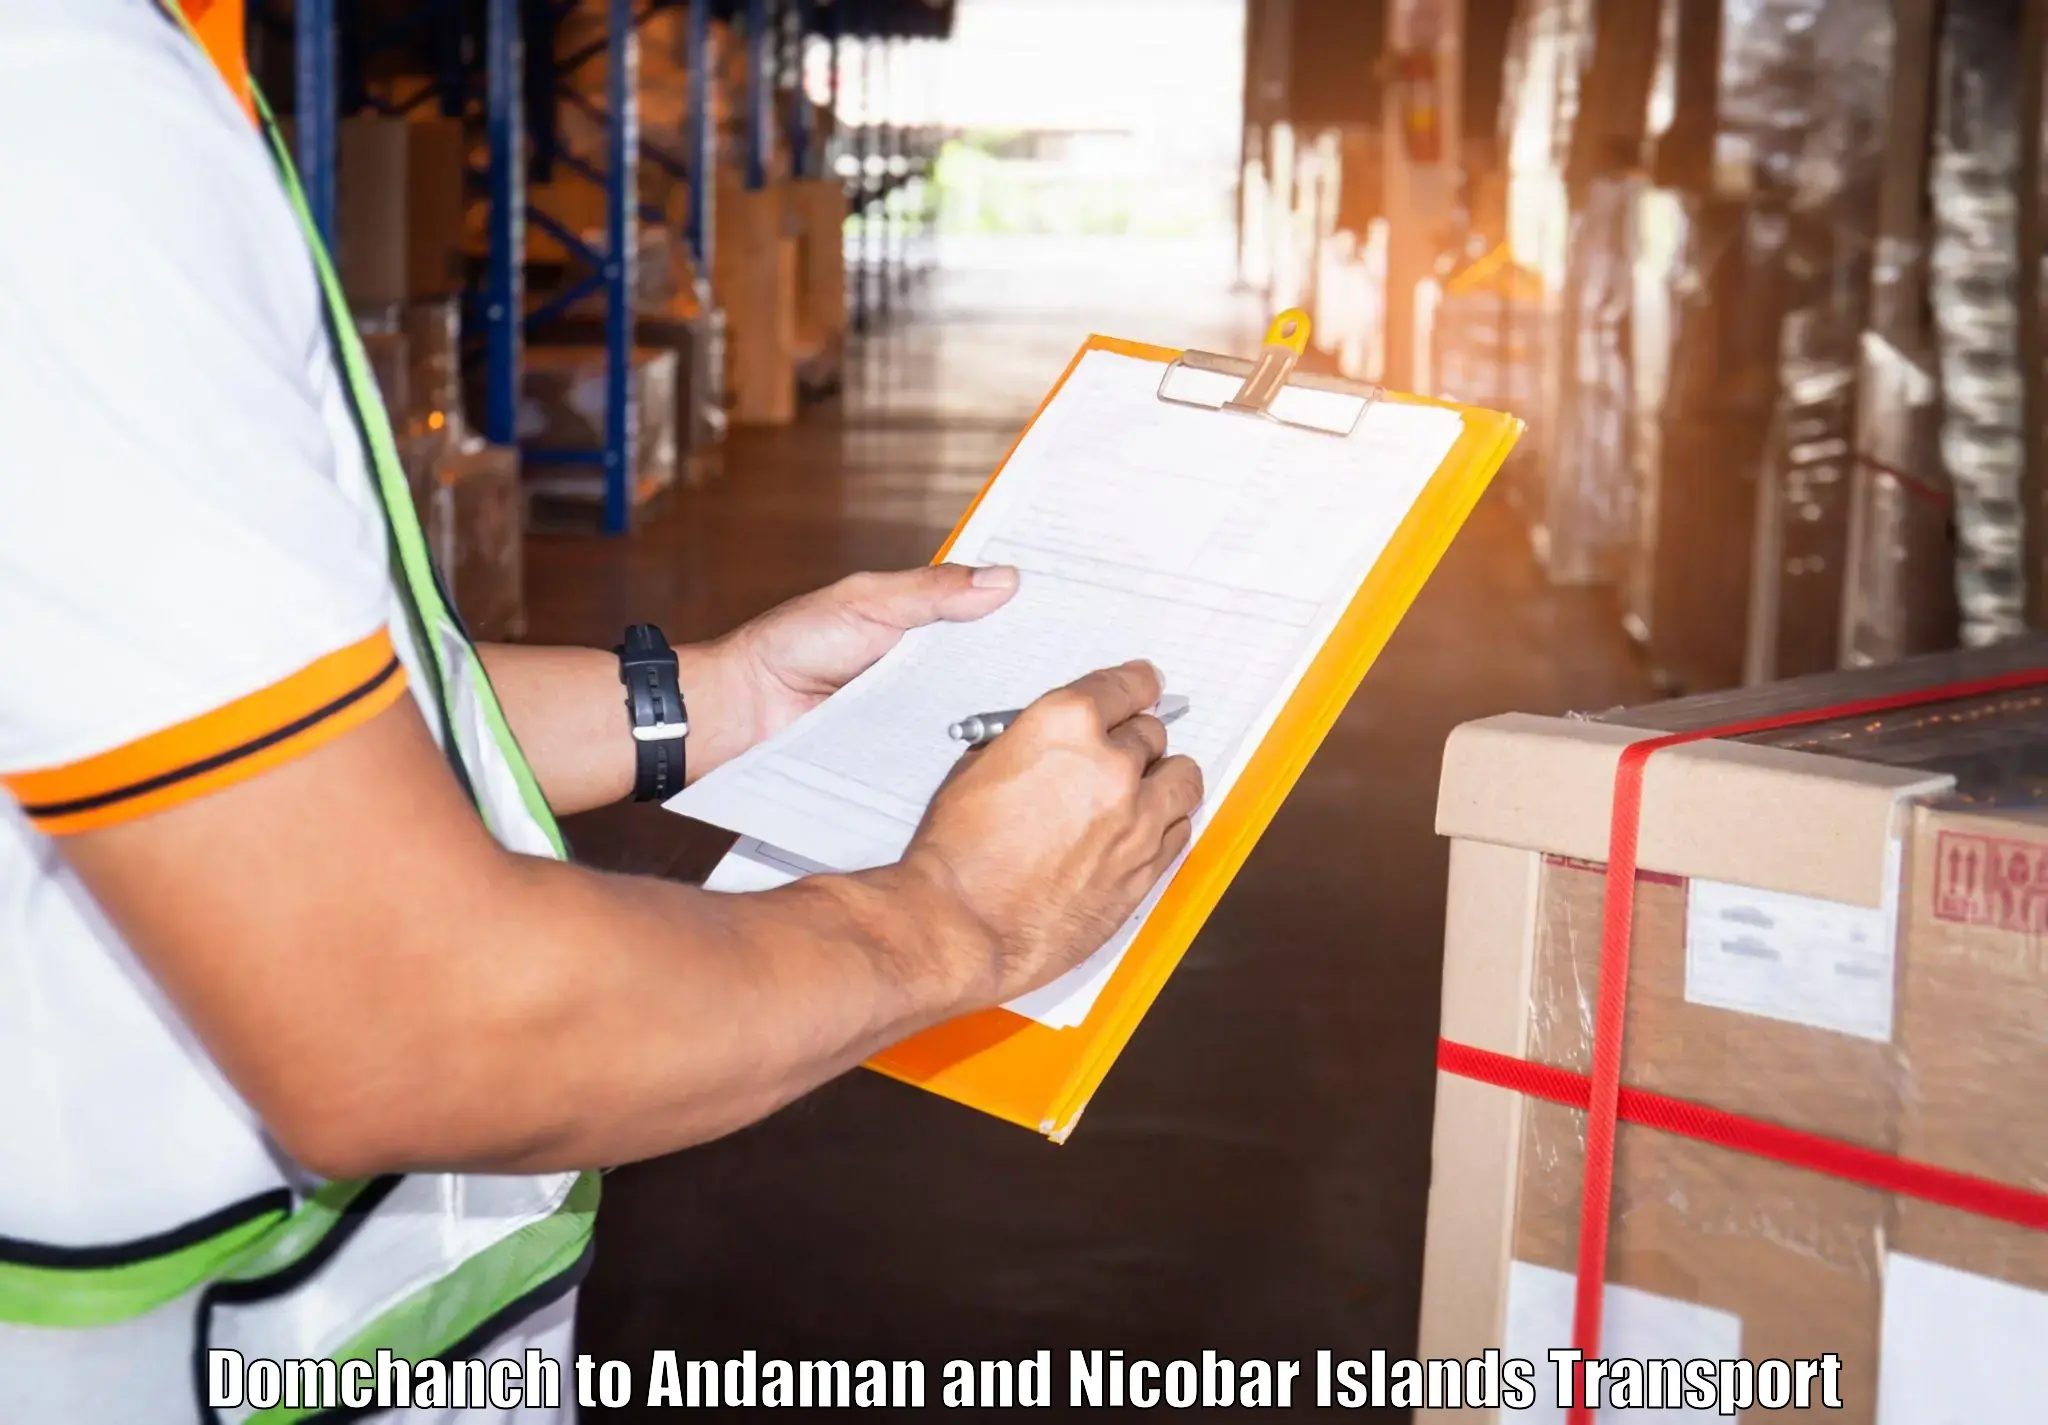 Container transportation services Domchanch to Andaman and Nicobar Islands